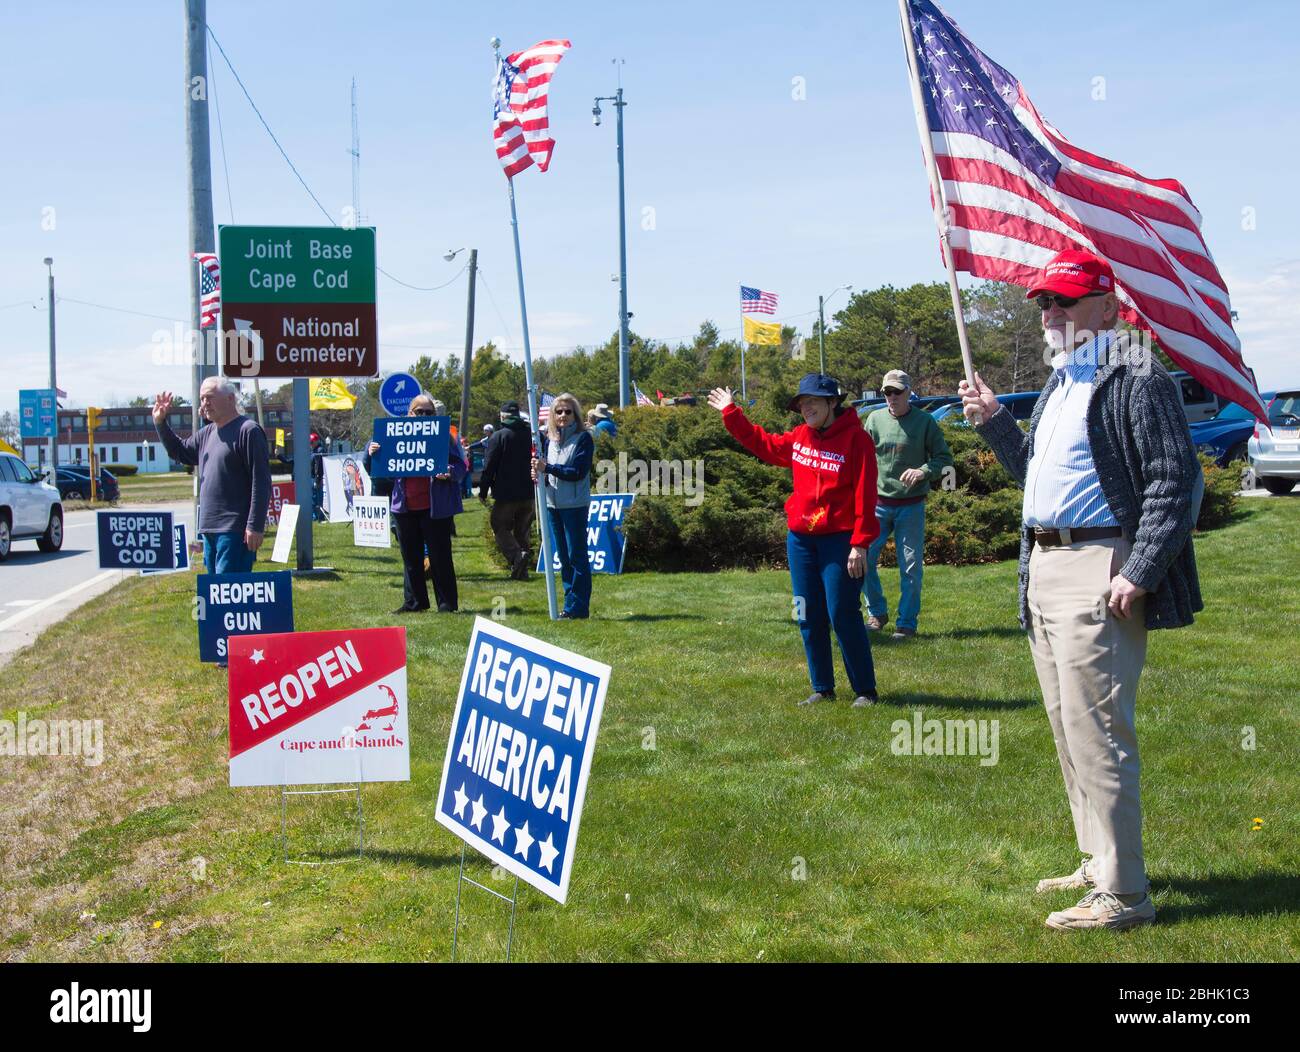 An 'open up' rally on Cape Cod, Massachusetts during the Covid 19 shutdown Stock Photo